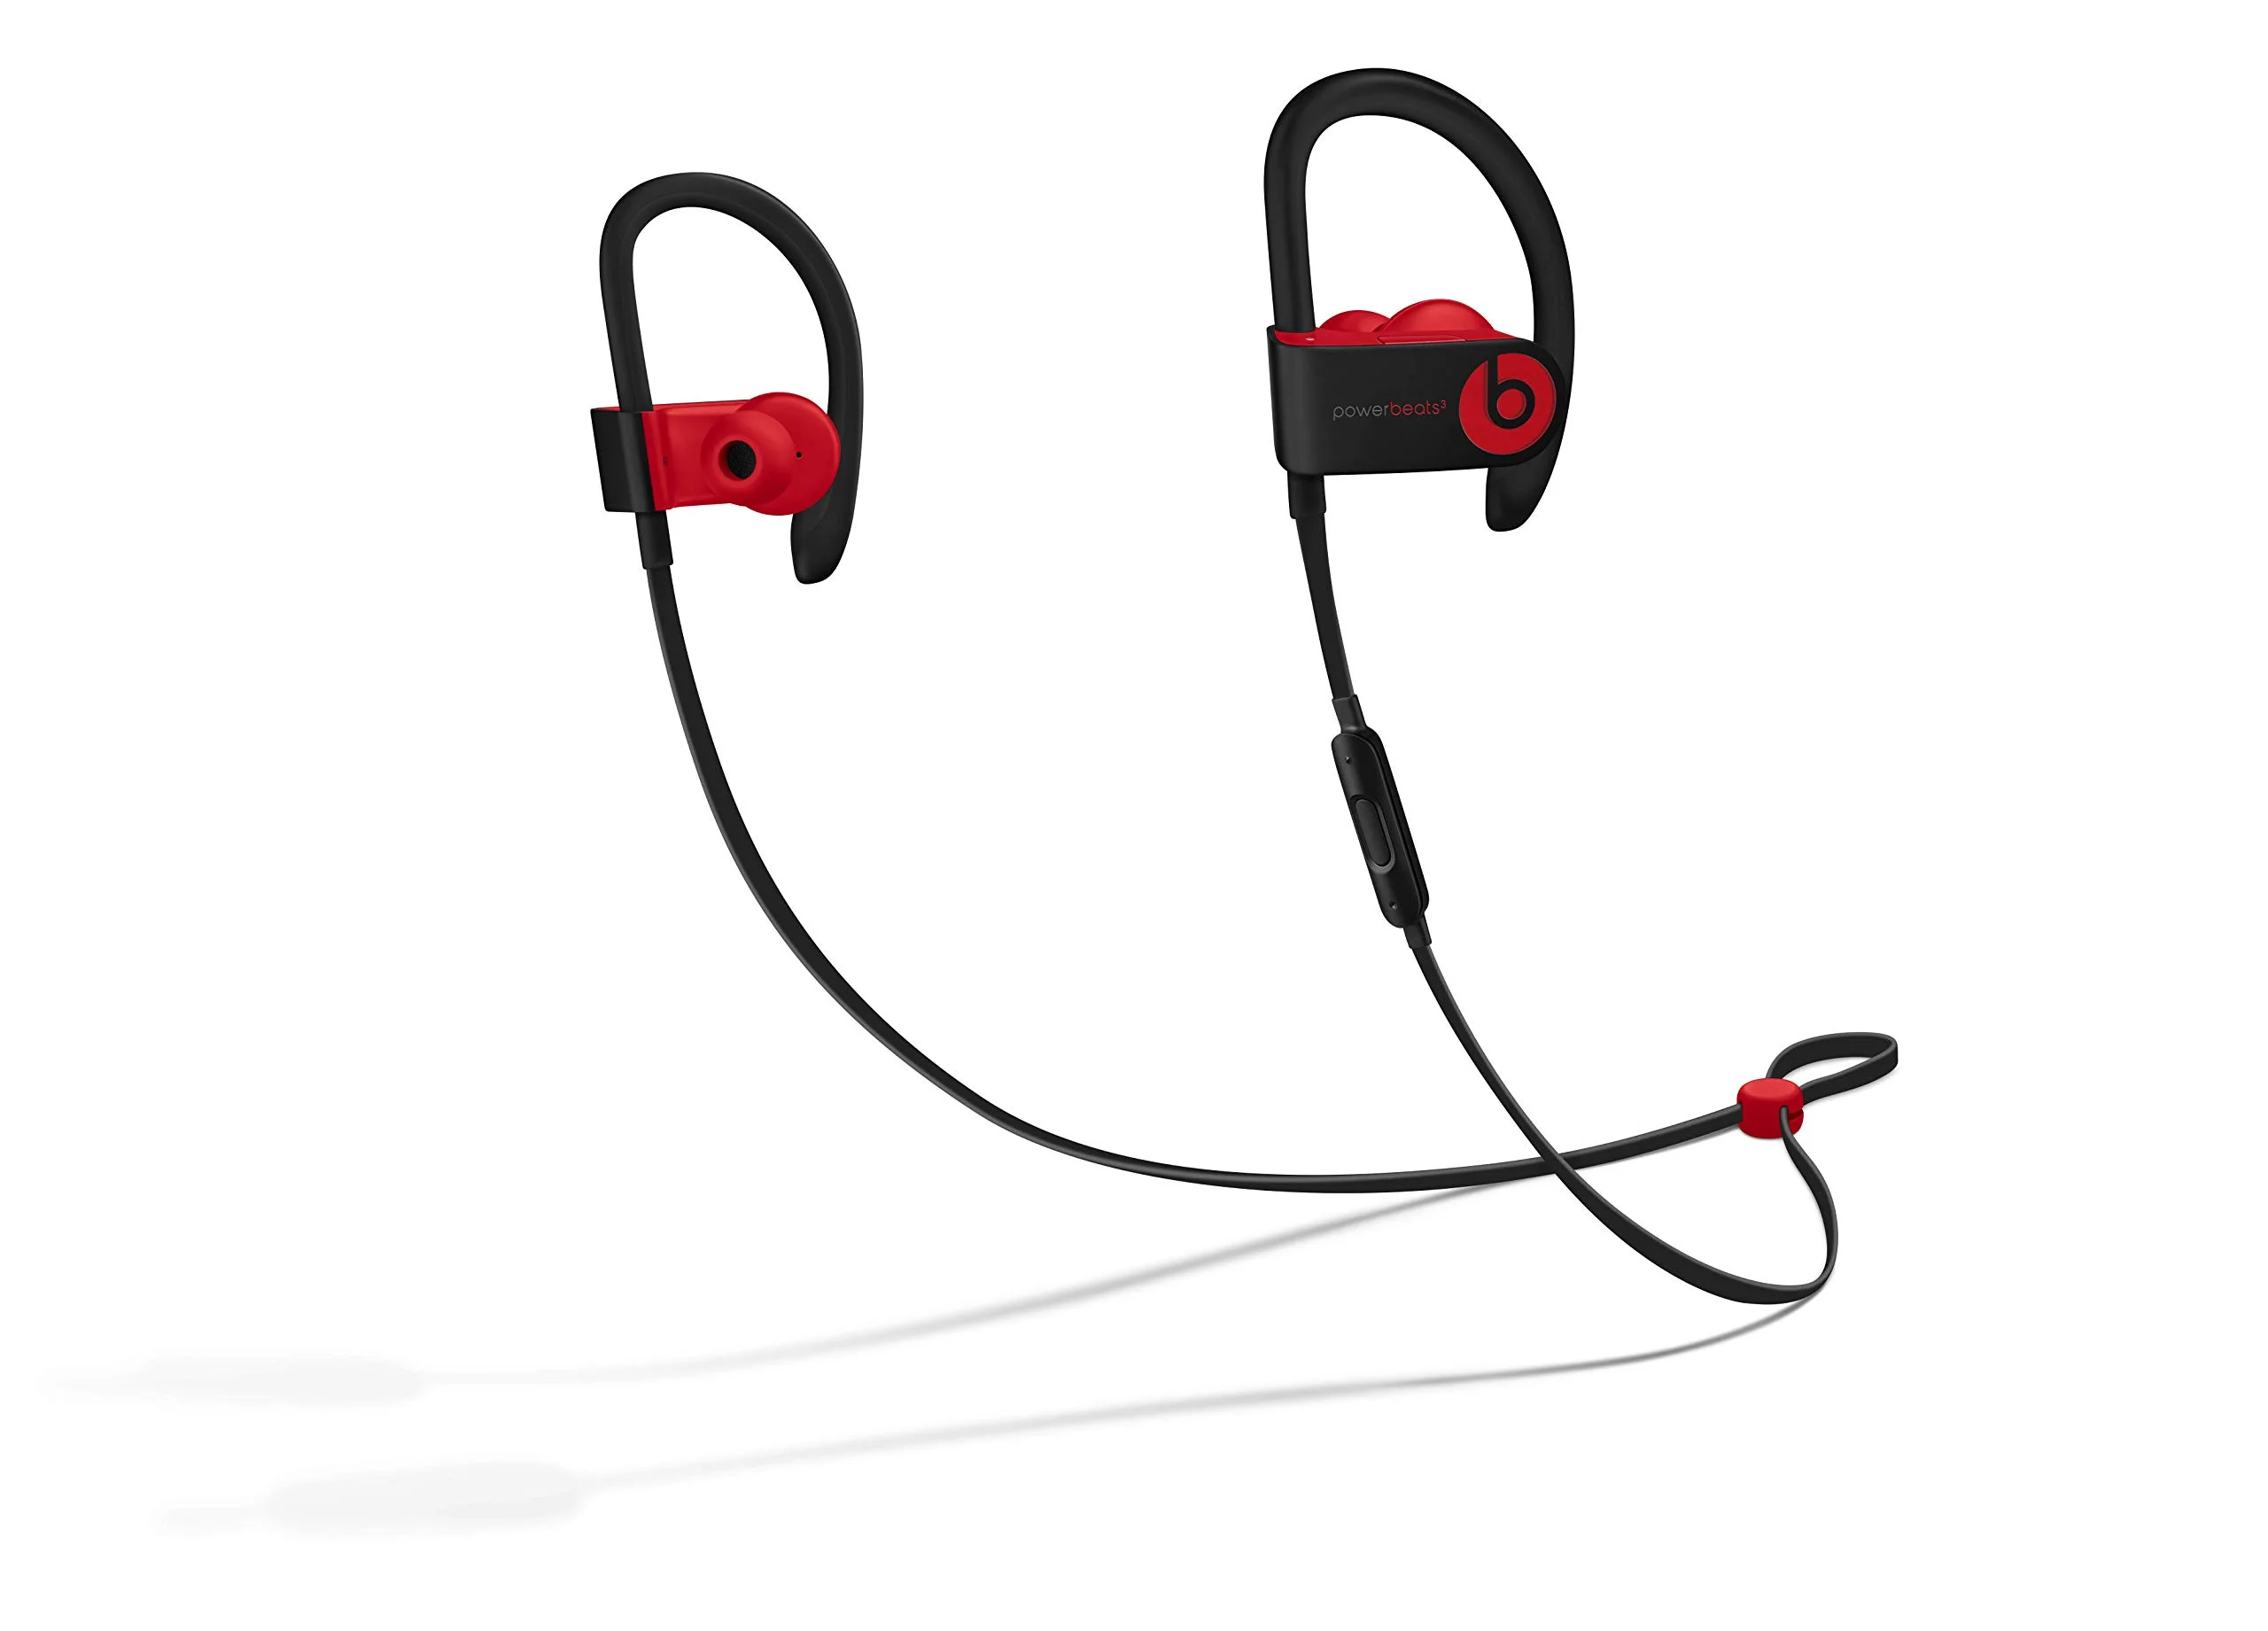 detail Indsigt resident Beats + Powerbeats3 Wireless Earphones &#8211; Apple W1 Headphone Chip,  Class 1 Bluetooth, 12 Hours Of Listening Time, Sweat Resistant Earbuds  &#8211; Defiant Black-Red